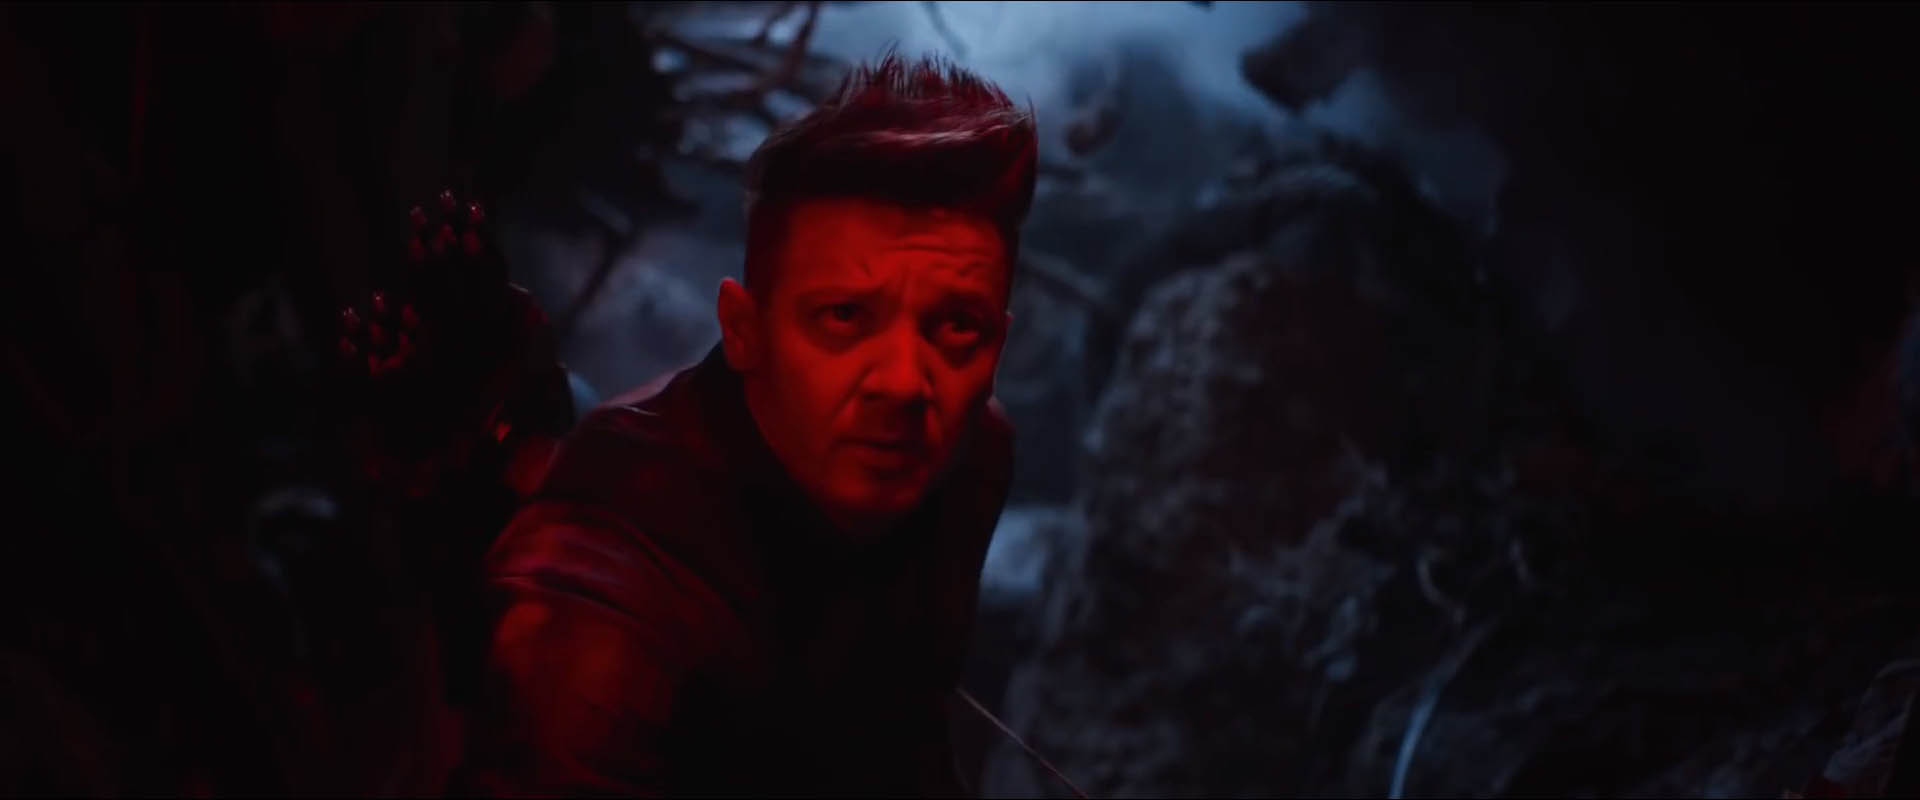 Avengers: Endgame Super Bowl commercial shows off new footage